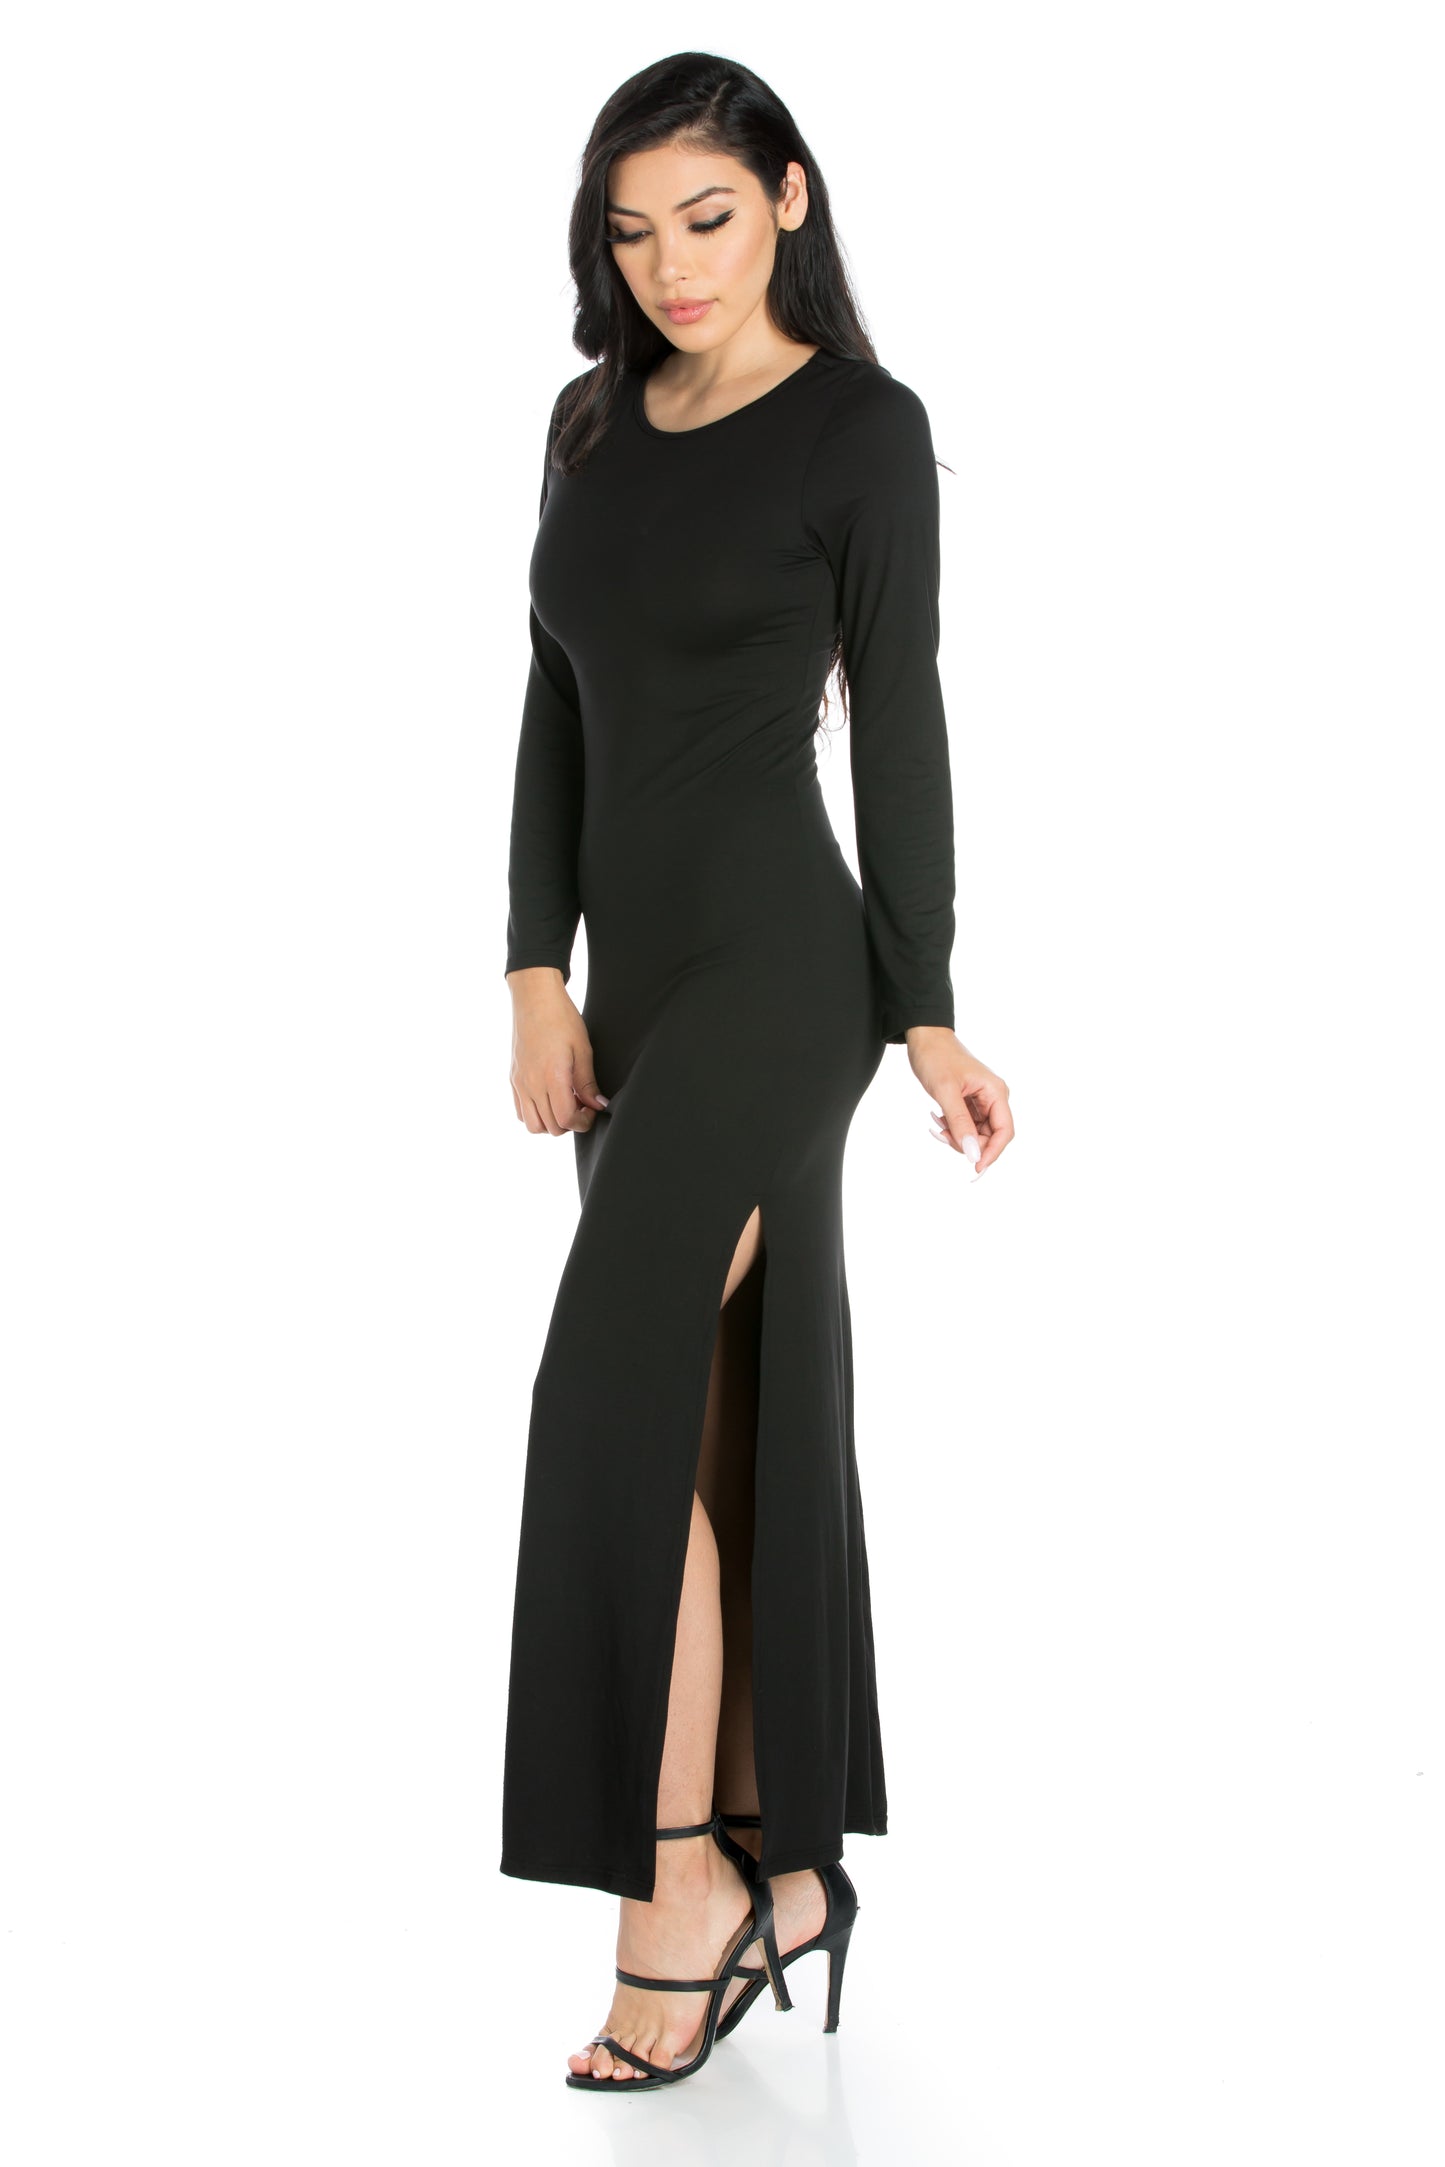 Womens Missy Long Sleeve Side Slit Fitted Black Maxi Dress